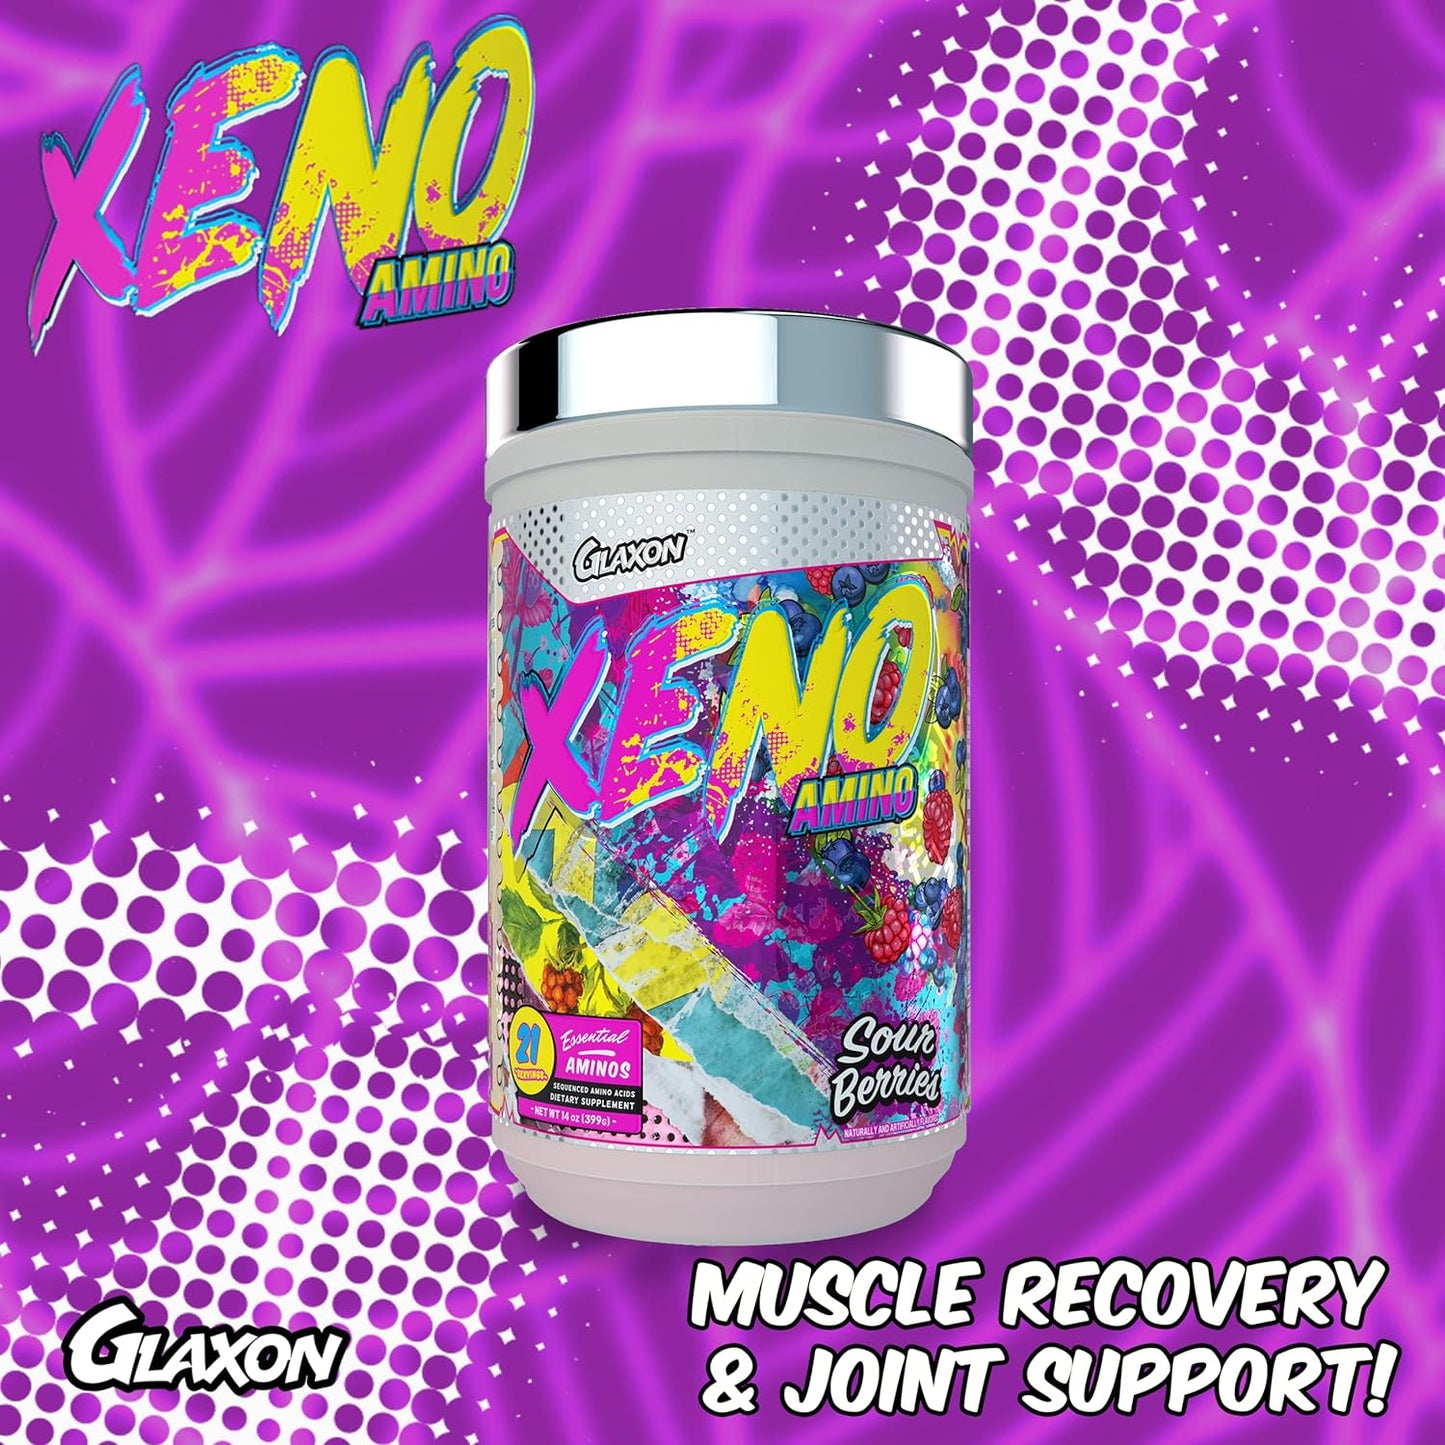 Glaxon Xeno Amino V3 Essential Sequenced Amino Acids – 10g of BCAA & EAA + Hydrating Electrolytes – Muscle Recovery & Joint Support for Men & Women – Great Taste (Sour Berries)